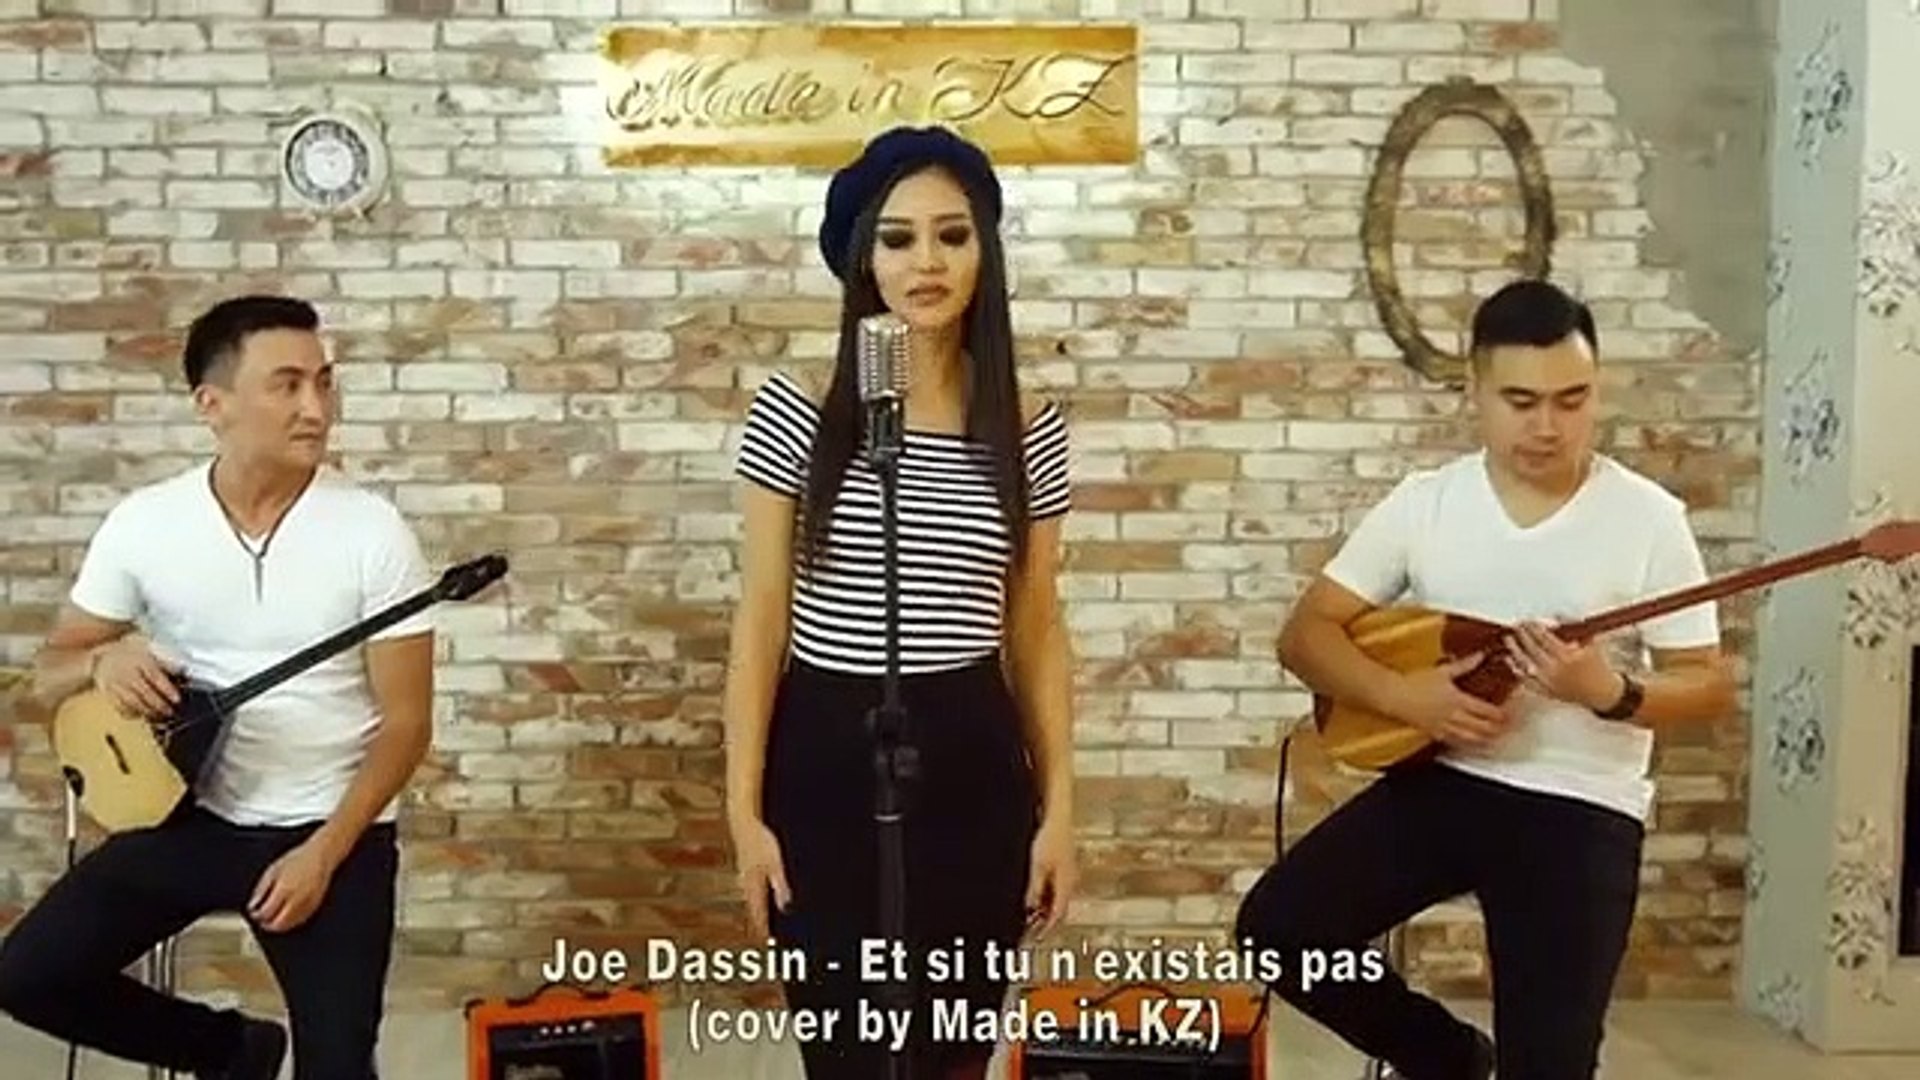 Joe Dassin - Et si tu n'existais pas (dombyra cover by Made in KZ) - video  Dailymotion